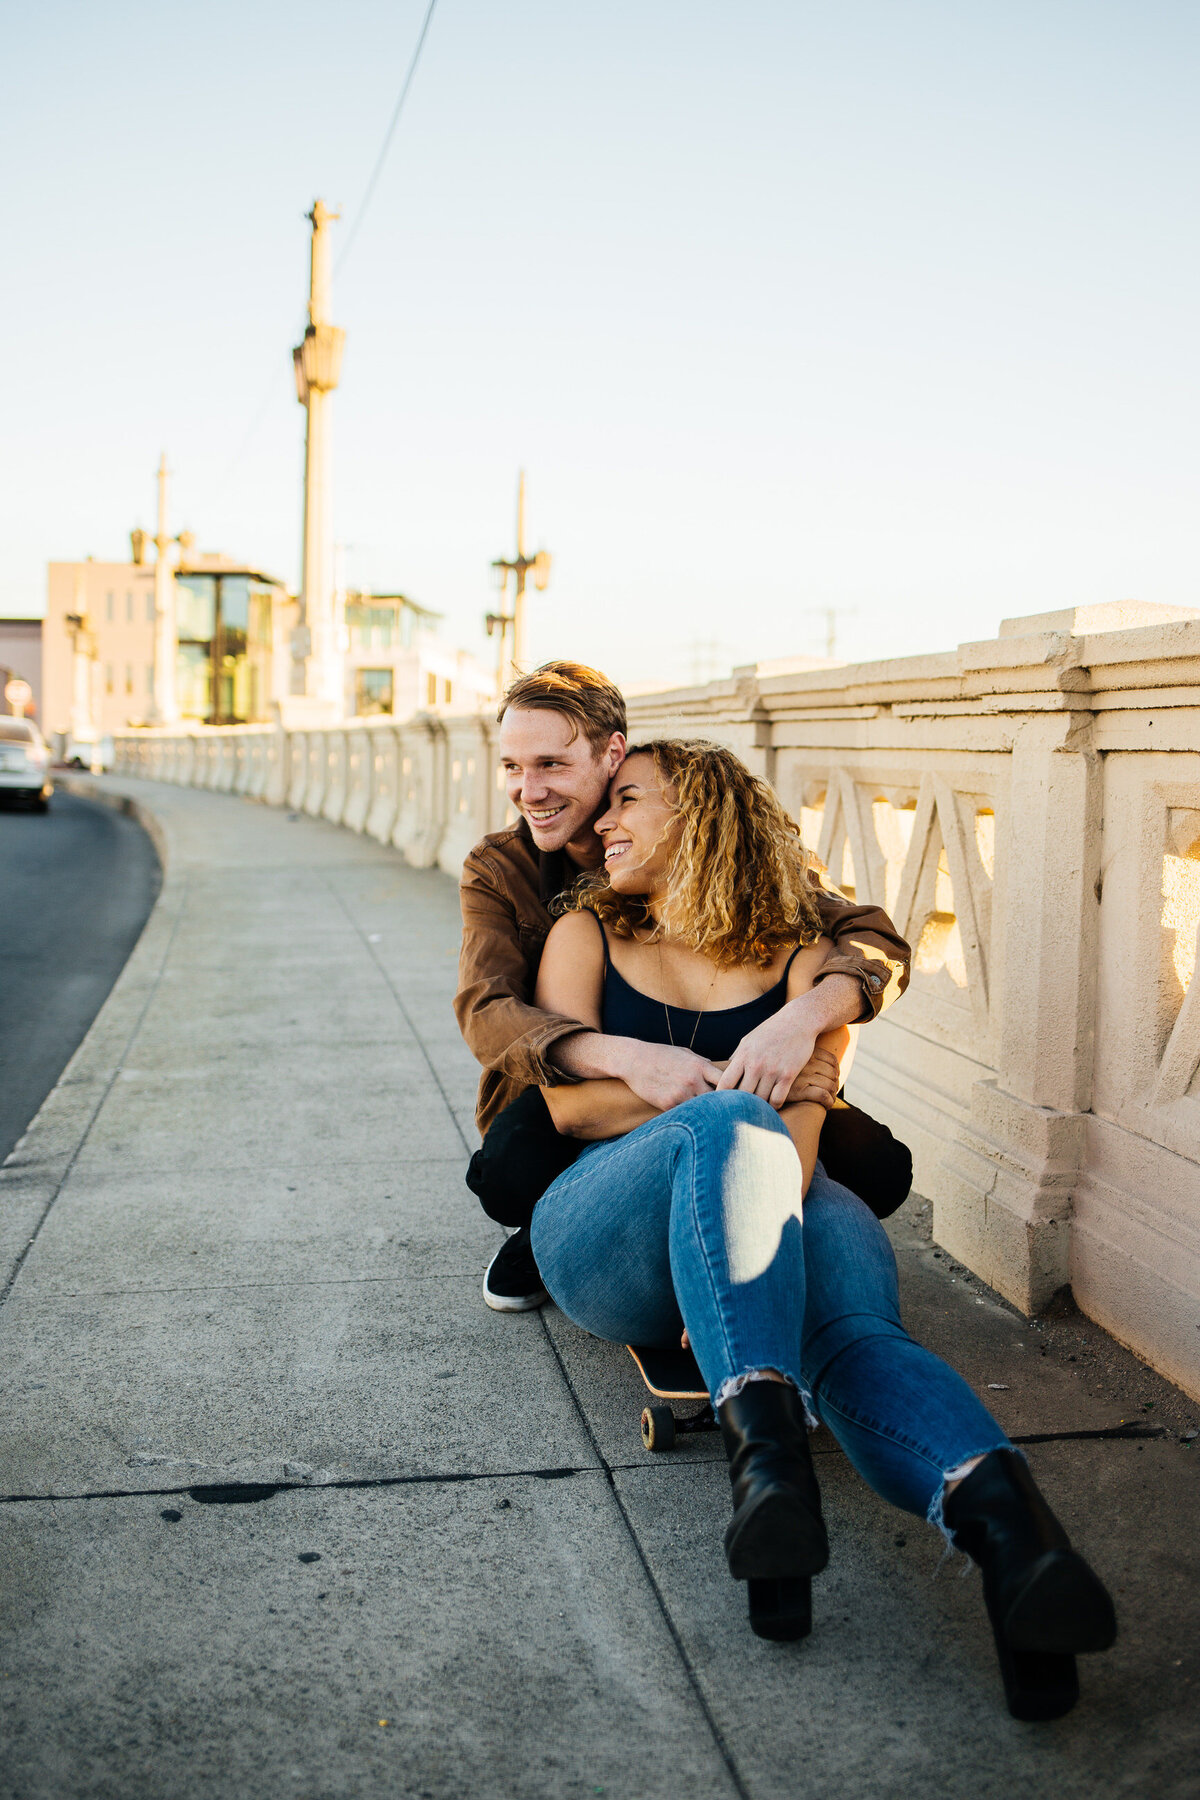 downtown-los-angeles-arts-district-engagement-photos-dtla-engagement-photos-los-angeles-wedding-photographer-erin-marton-photography-19